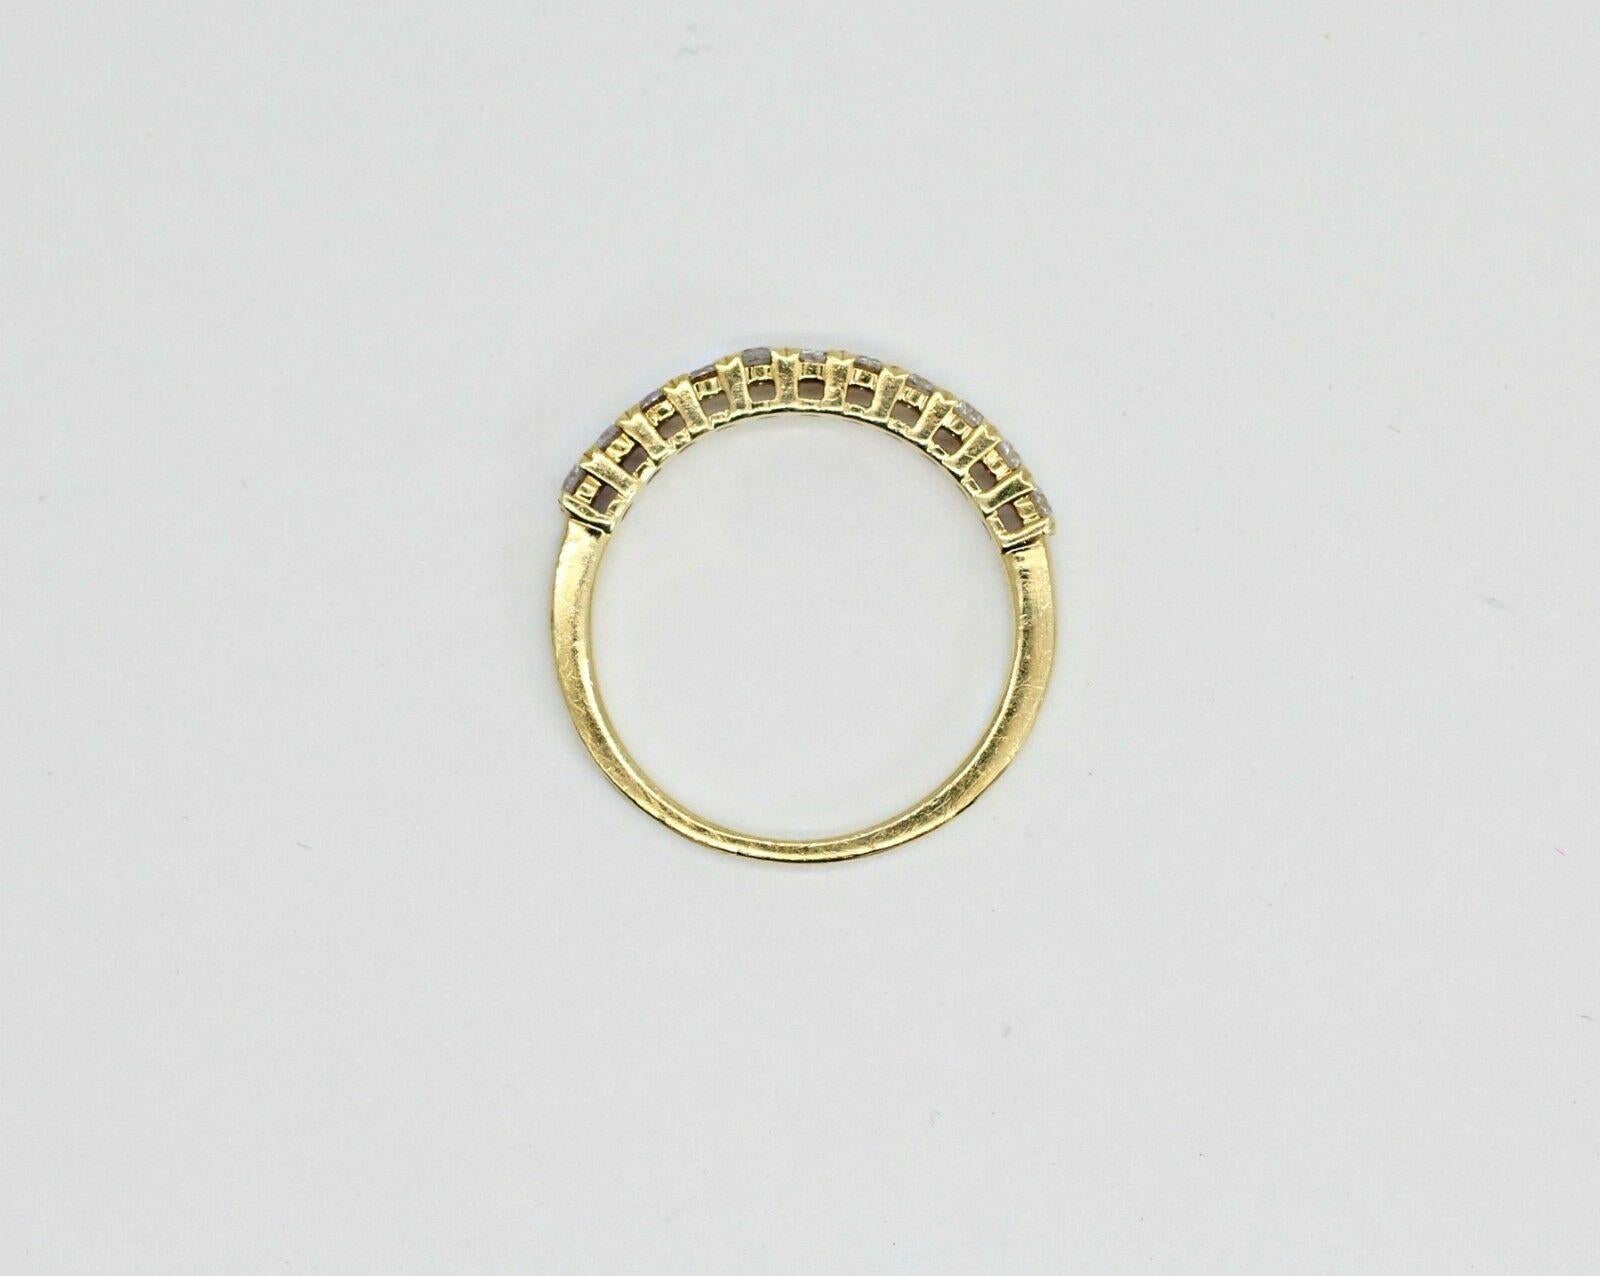 A vintage diamond band in solid 14k yellow gold, with 11 round diamonds, approximately 0.44 carat total weight. it's current ring size is 7US but I can get it resized for free. 
Diamonds
Shape:     Round
Carat Total Weight:    0.44ctw
Color:      G